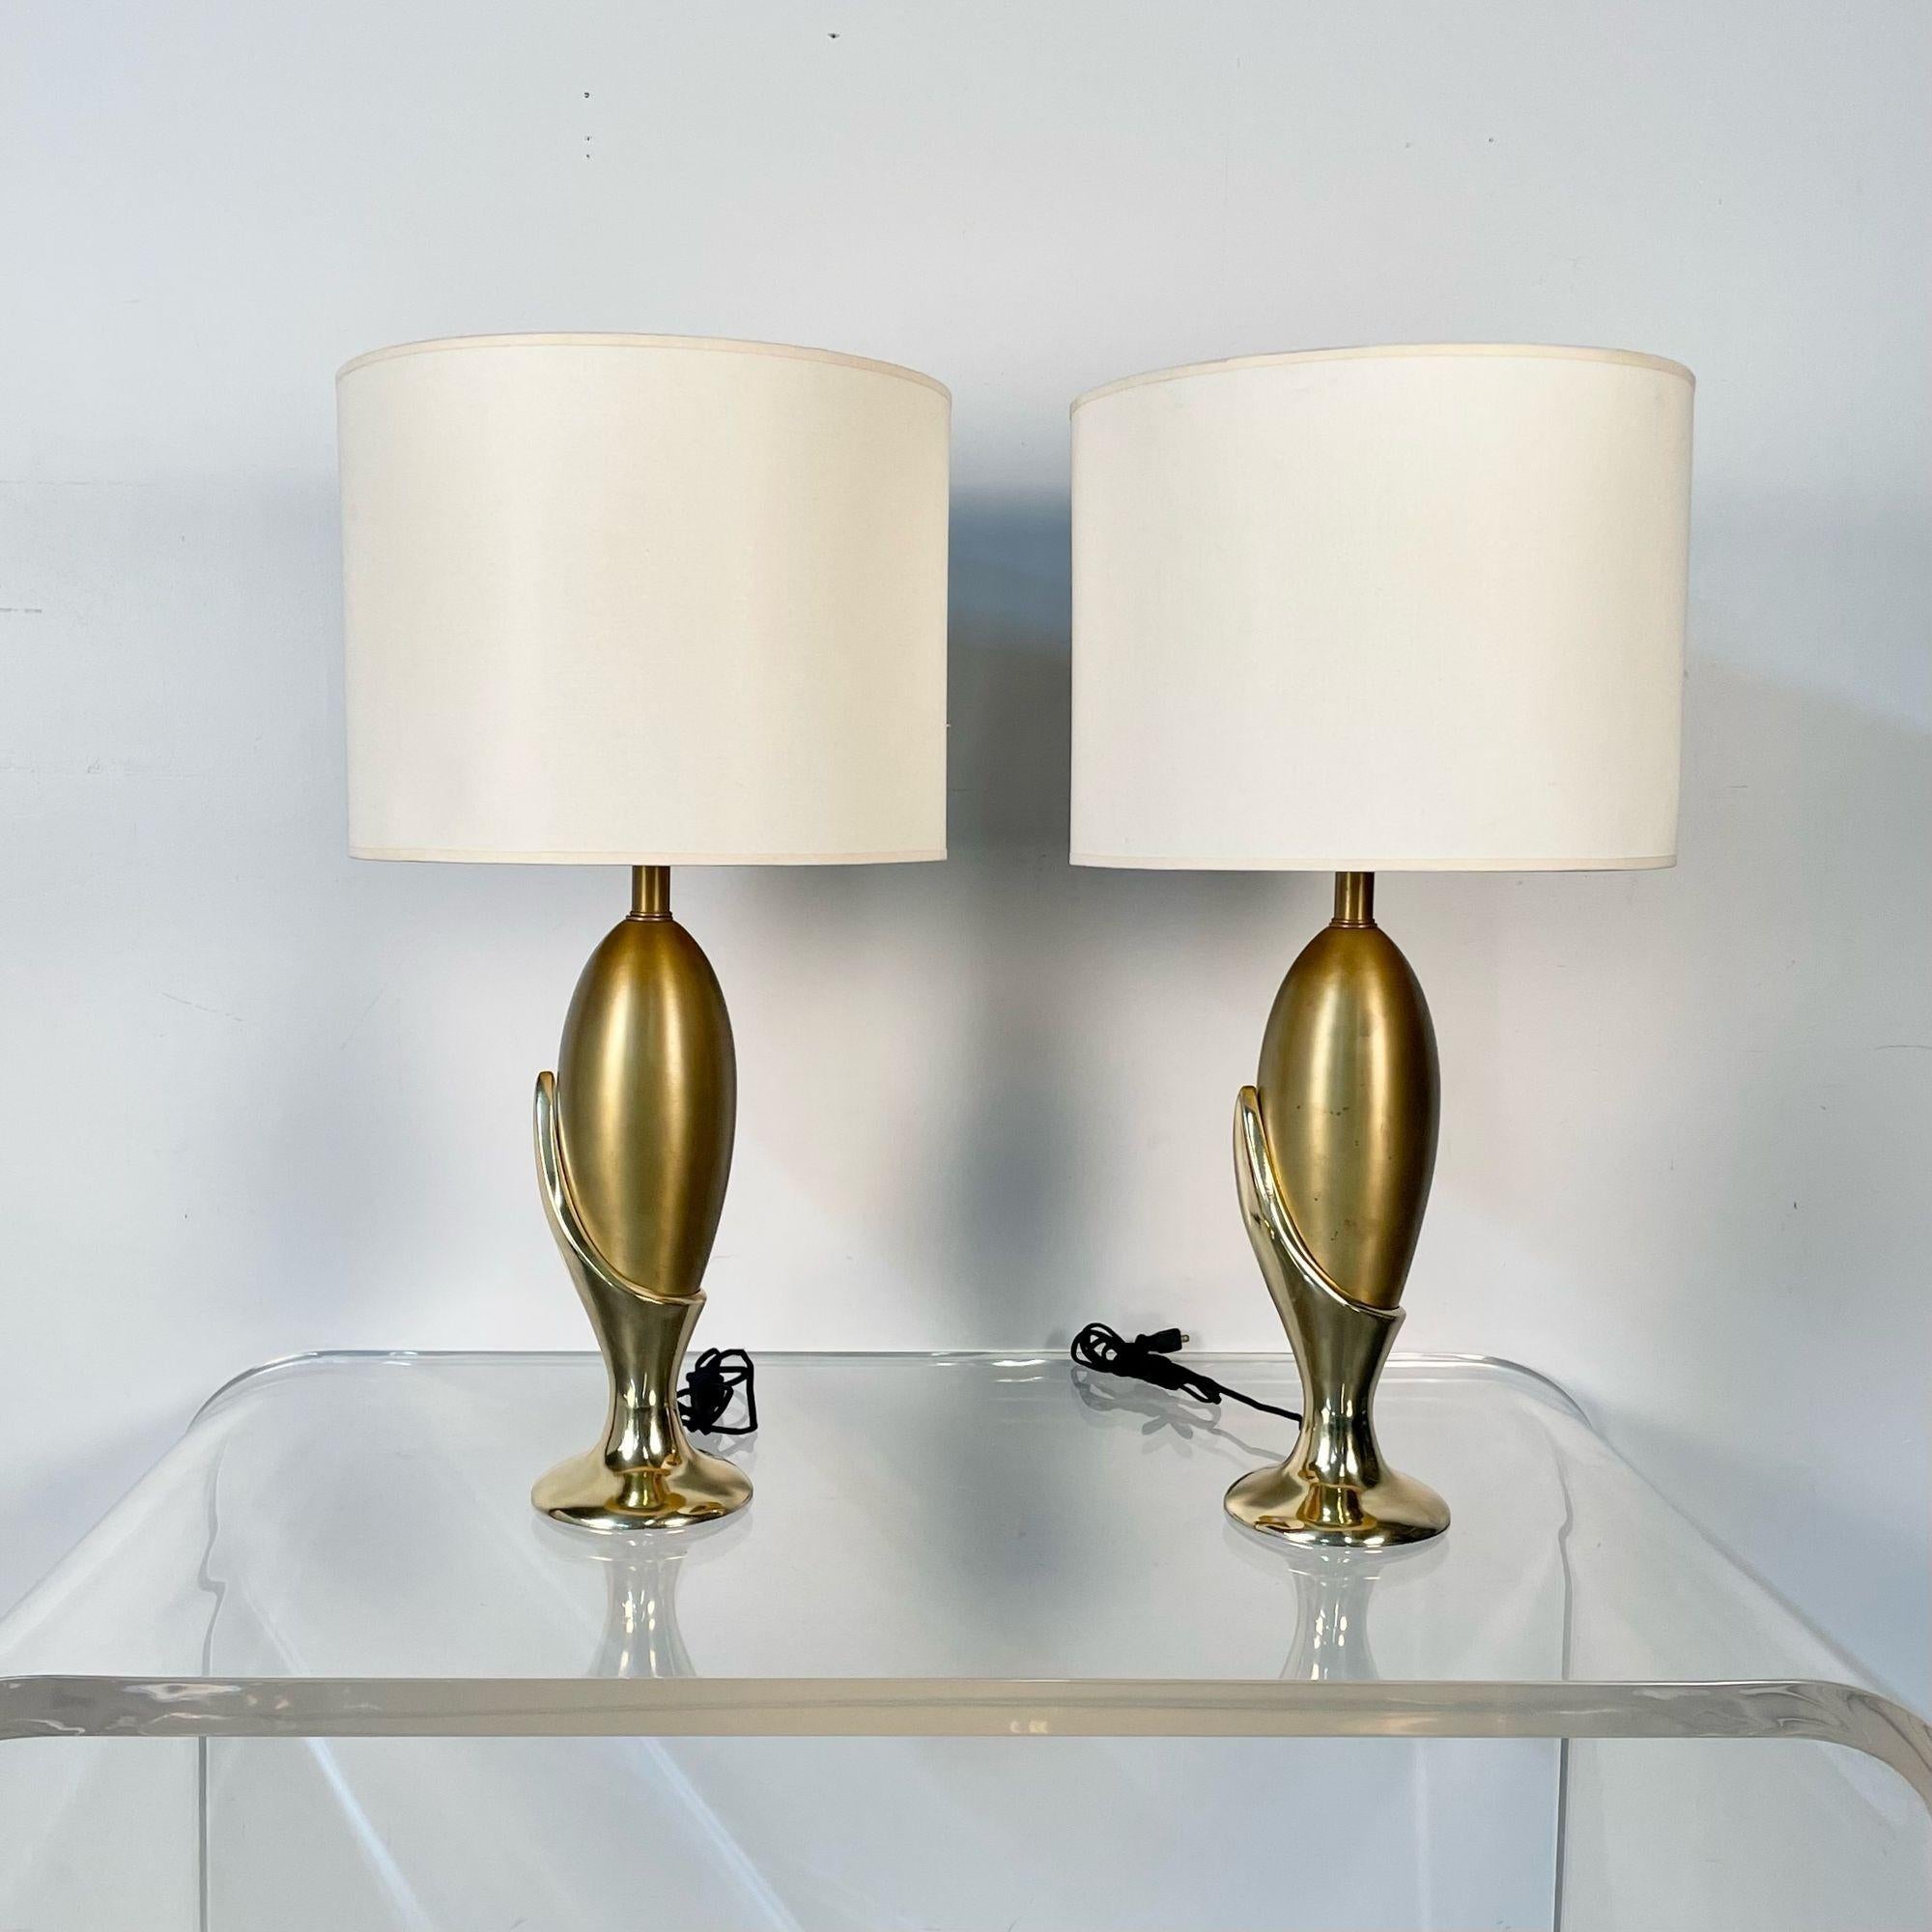 Pair of French Mid-Century Modern Sculptural Bronze Table / Desk Lamps In Good Condition For Sale In Stamford, CT